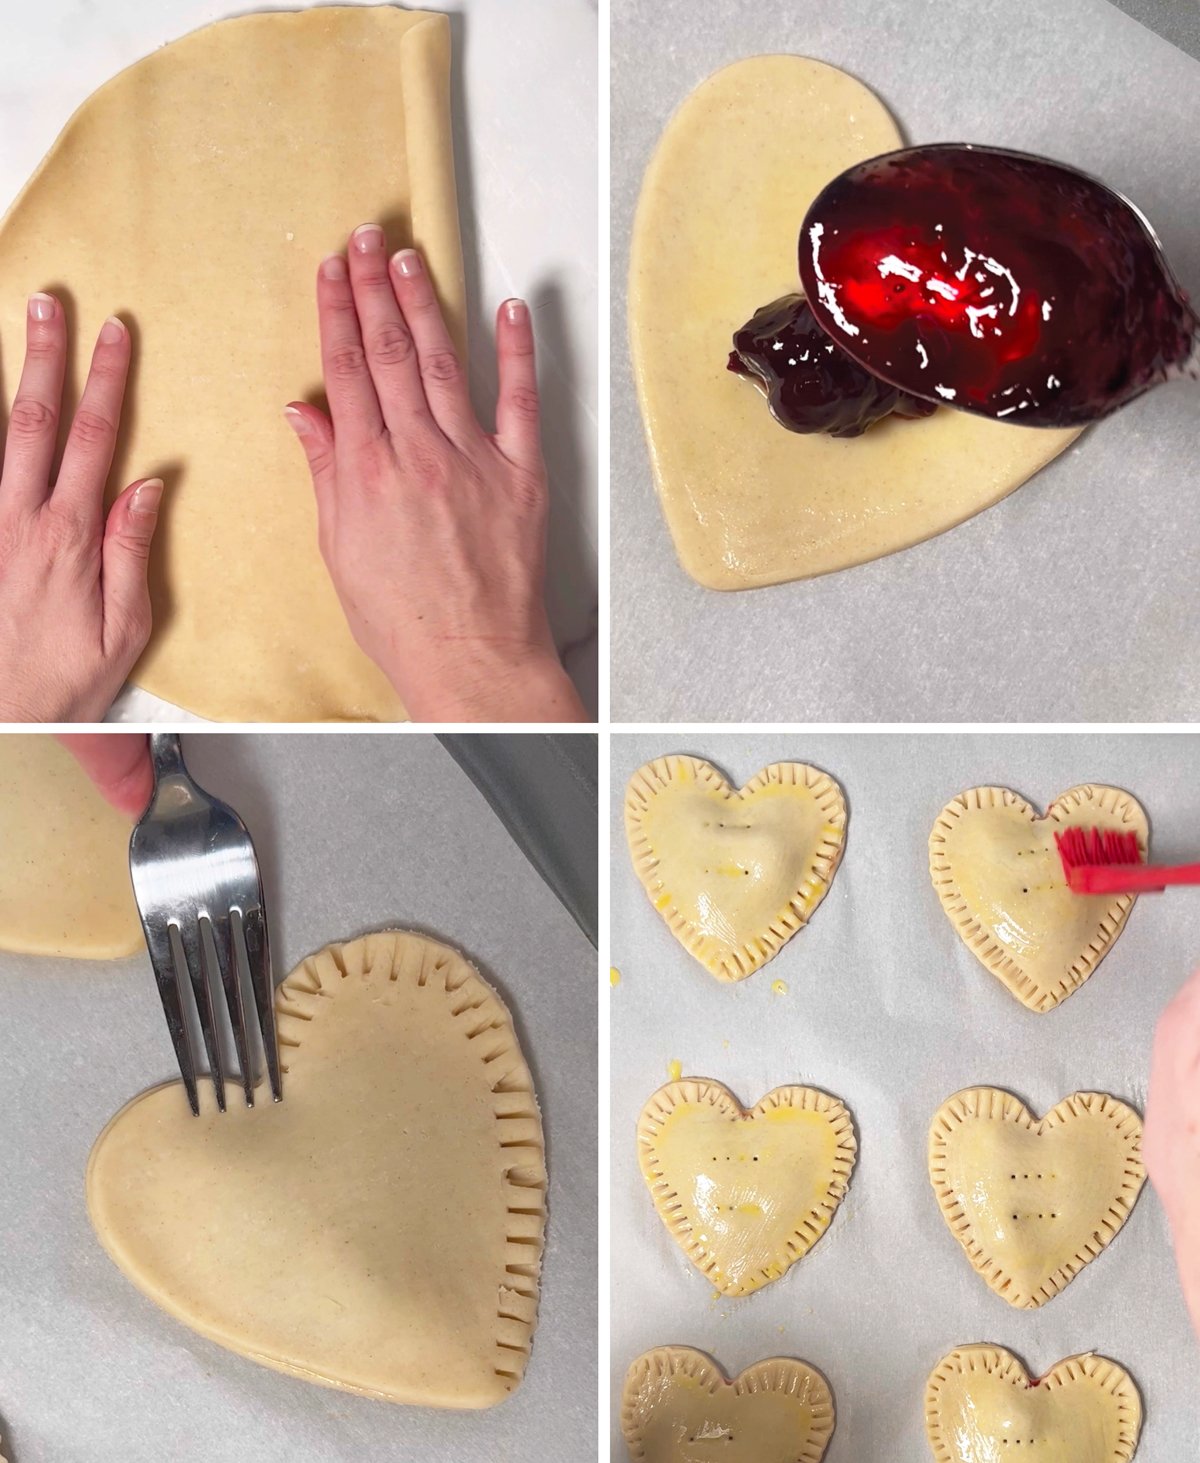 Four photos showing steps of how to make pop tarts.